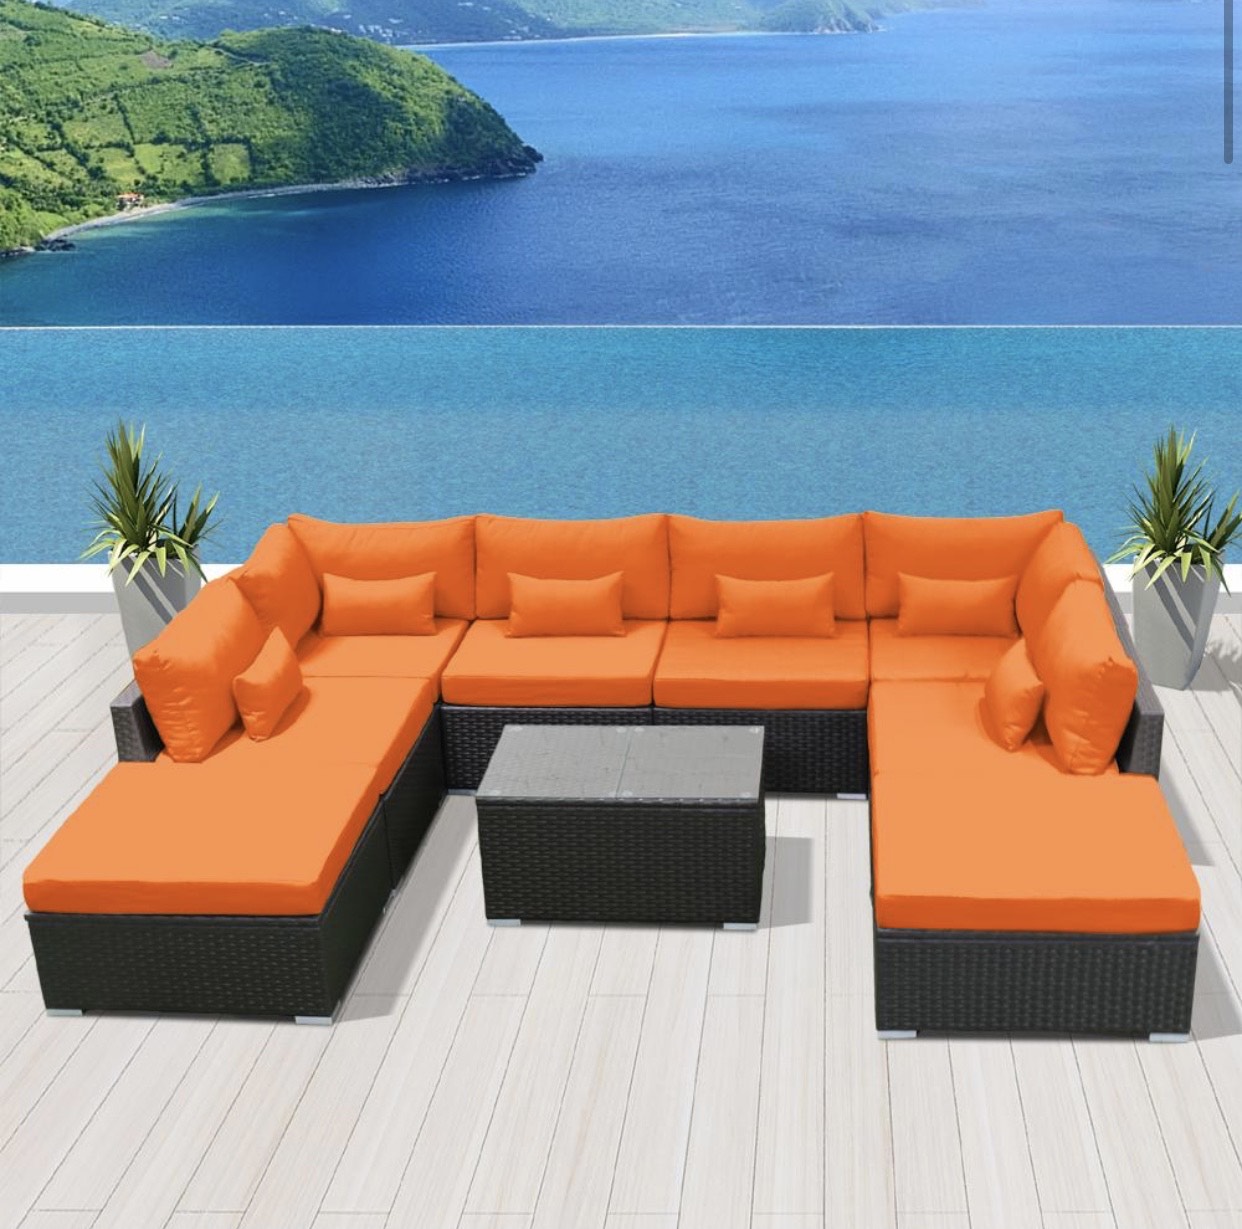 Orange 9C Replacement Cushion Covers Outside Furniture Set (Without Foam Insis)